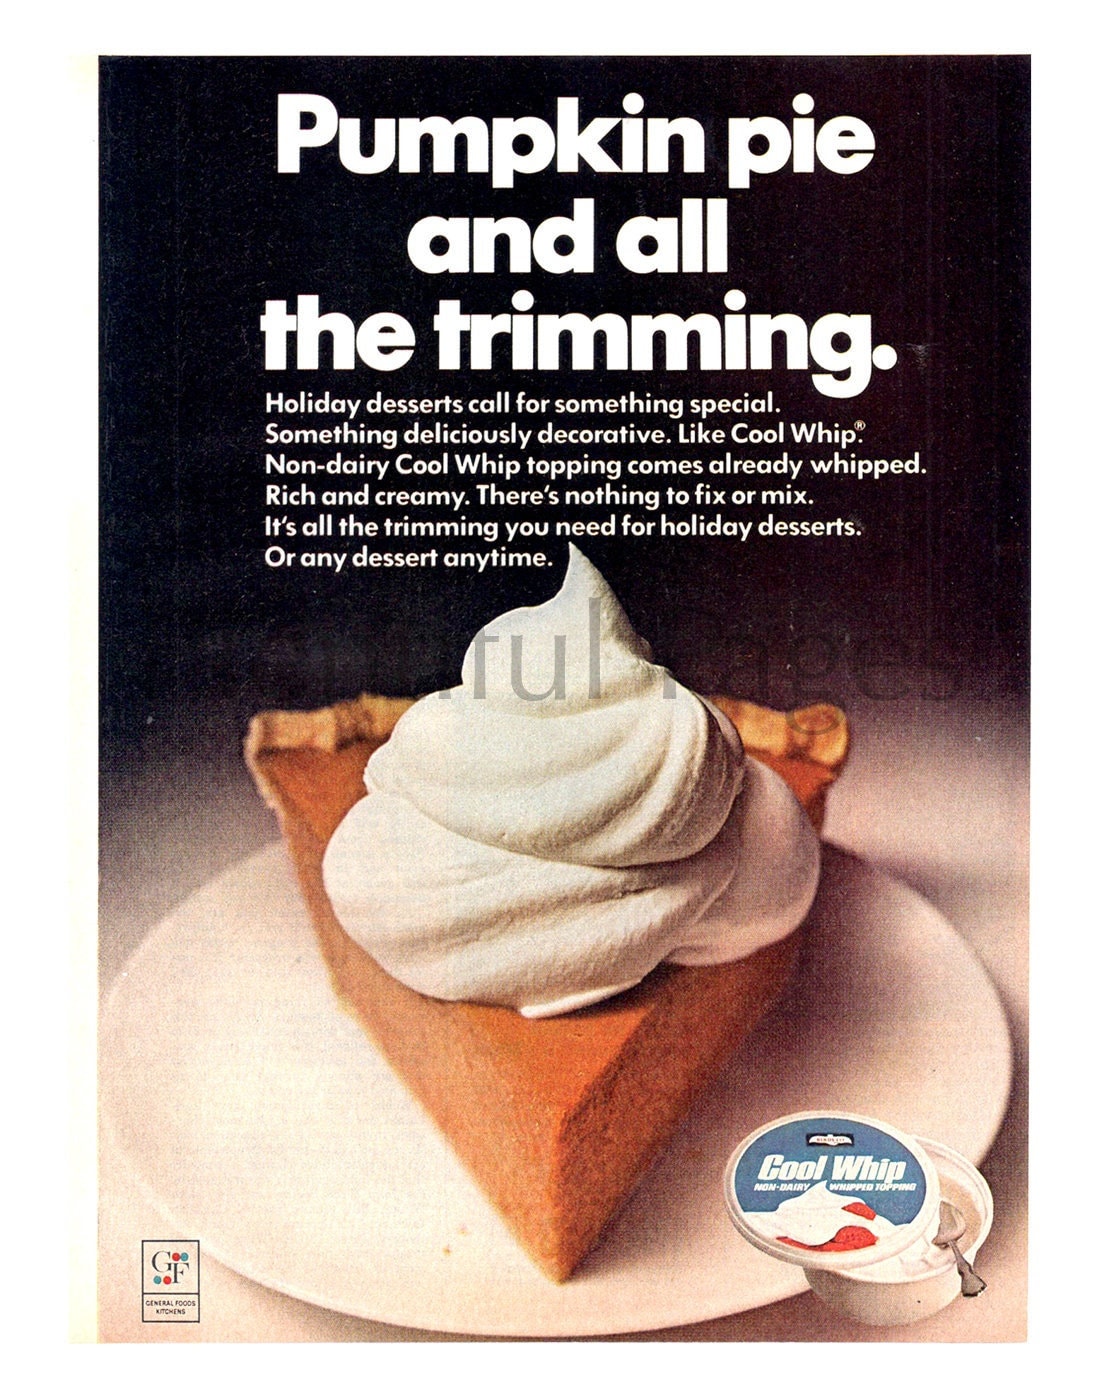 1969 Cool Whip Vintage Ad, Advertising Art, Pumpkin Pie, Whipped Topping, Magazine  Ad, Dessert, Advertisement, Great for Framing or Collage. -  Norway